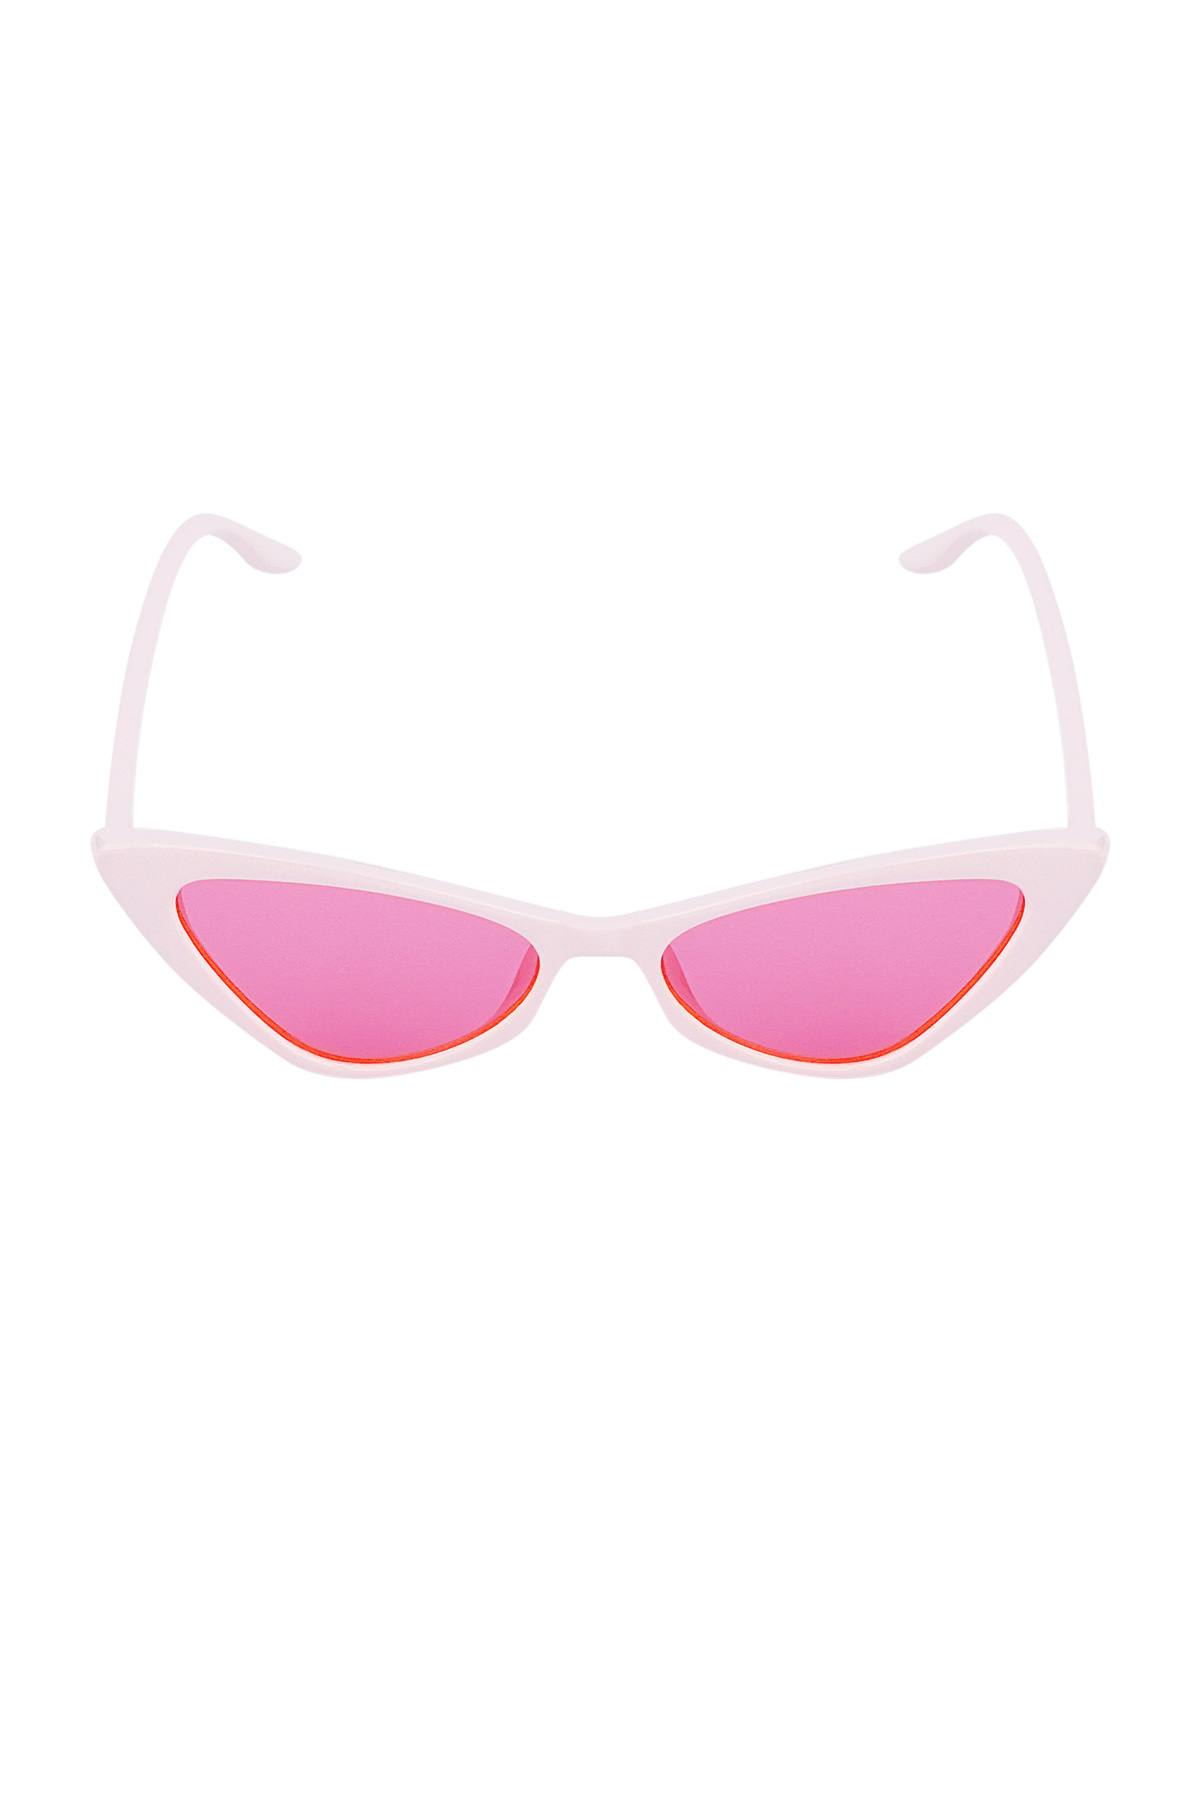 Barbie vibe sunglasses - pink Picture5